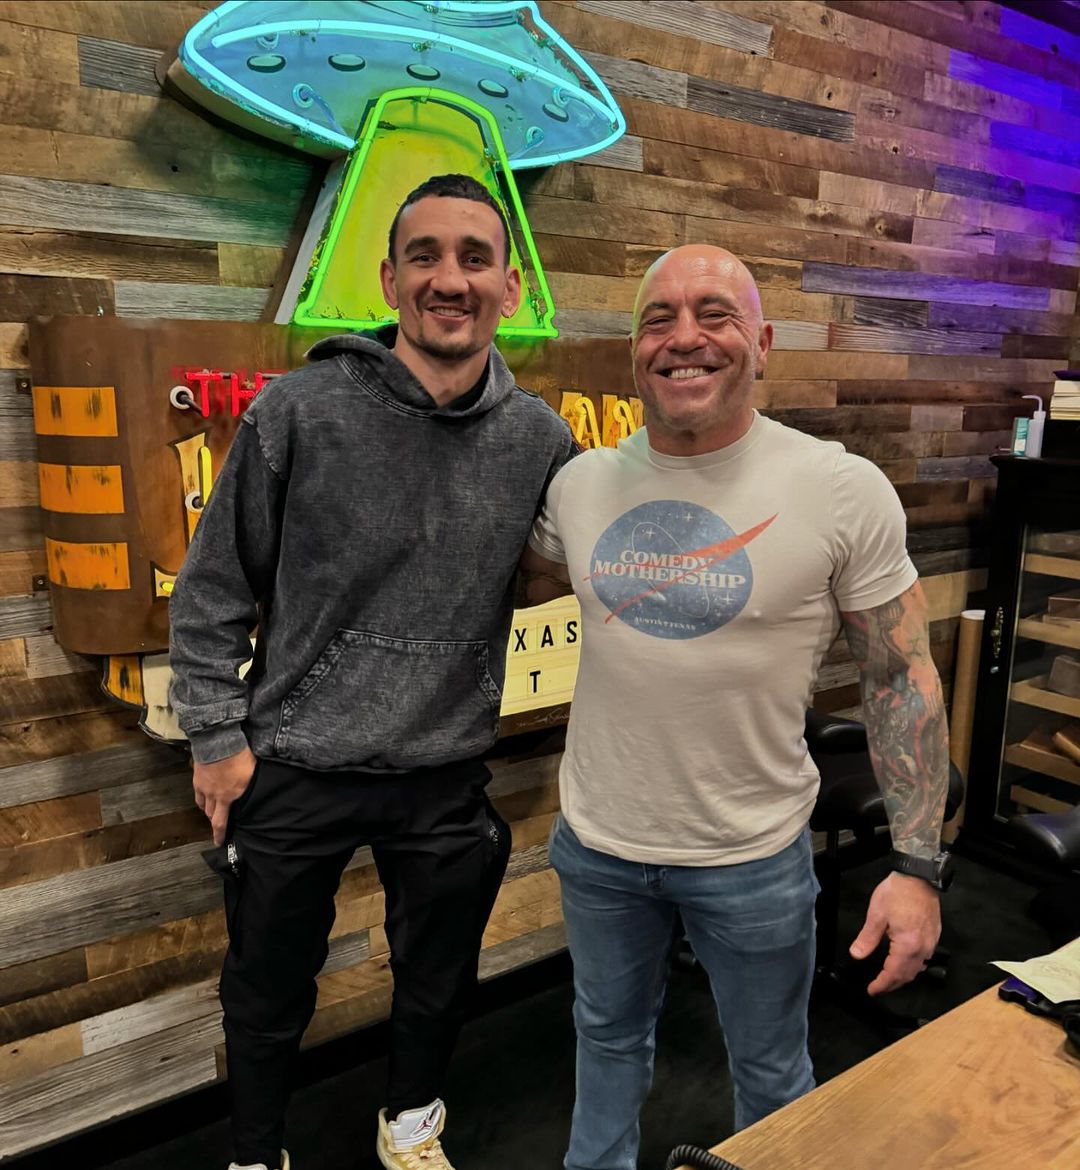 Brains, brawn, and big laughs! That's the recipe for a memorable JRE episode. #JRE #PodcastGold #joerogan #maxholloway